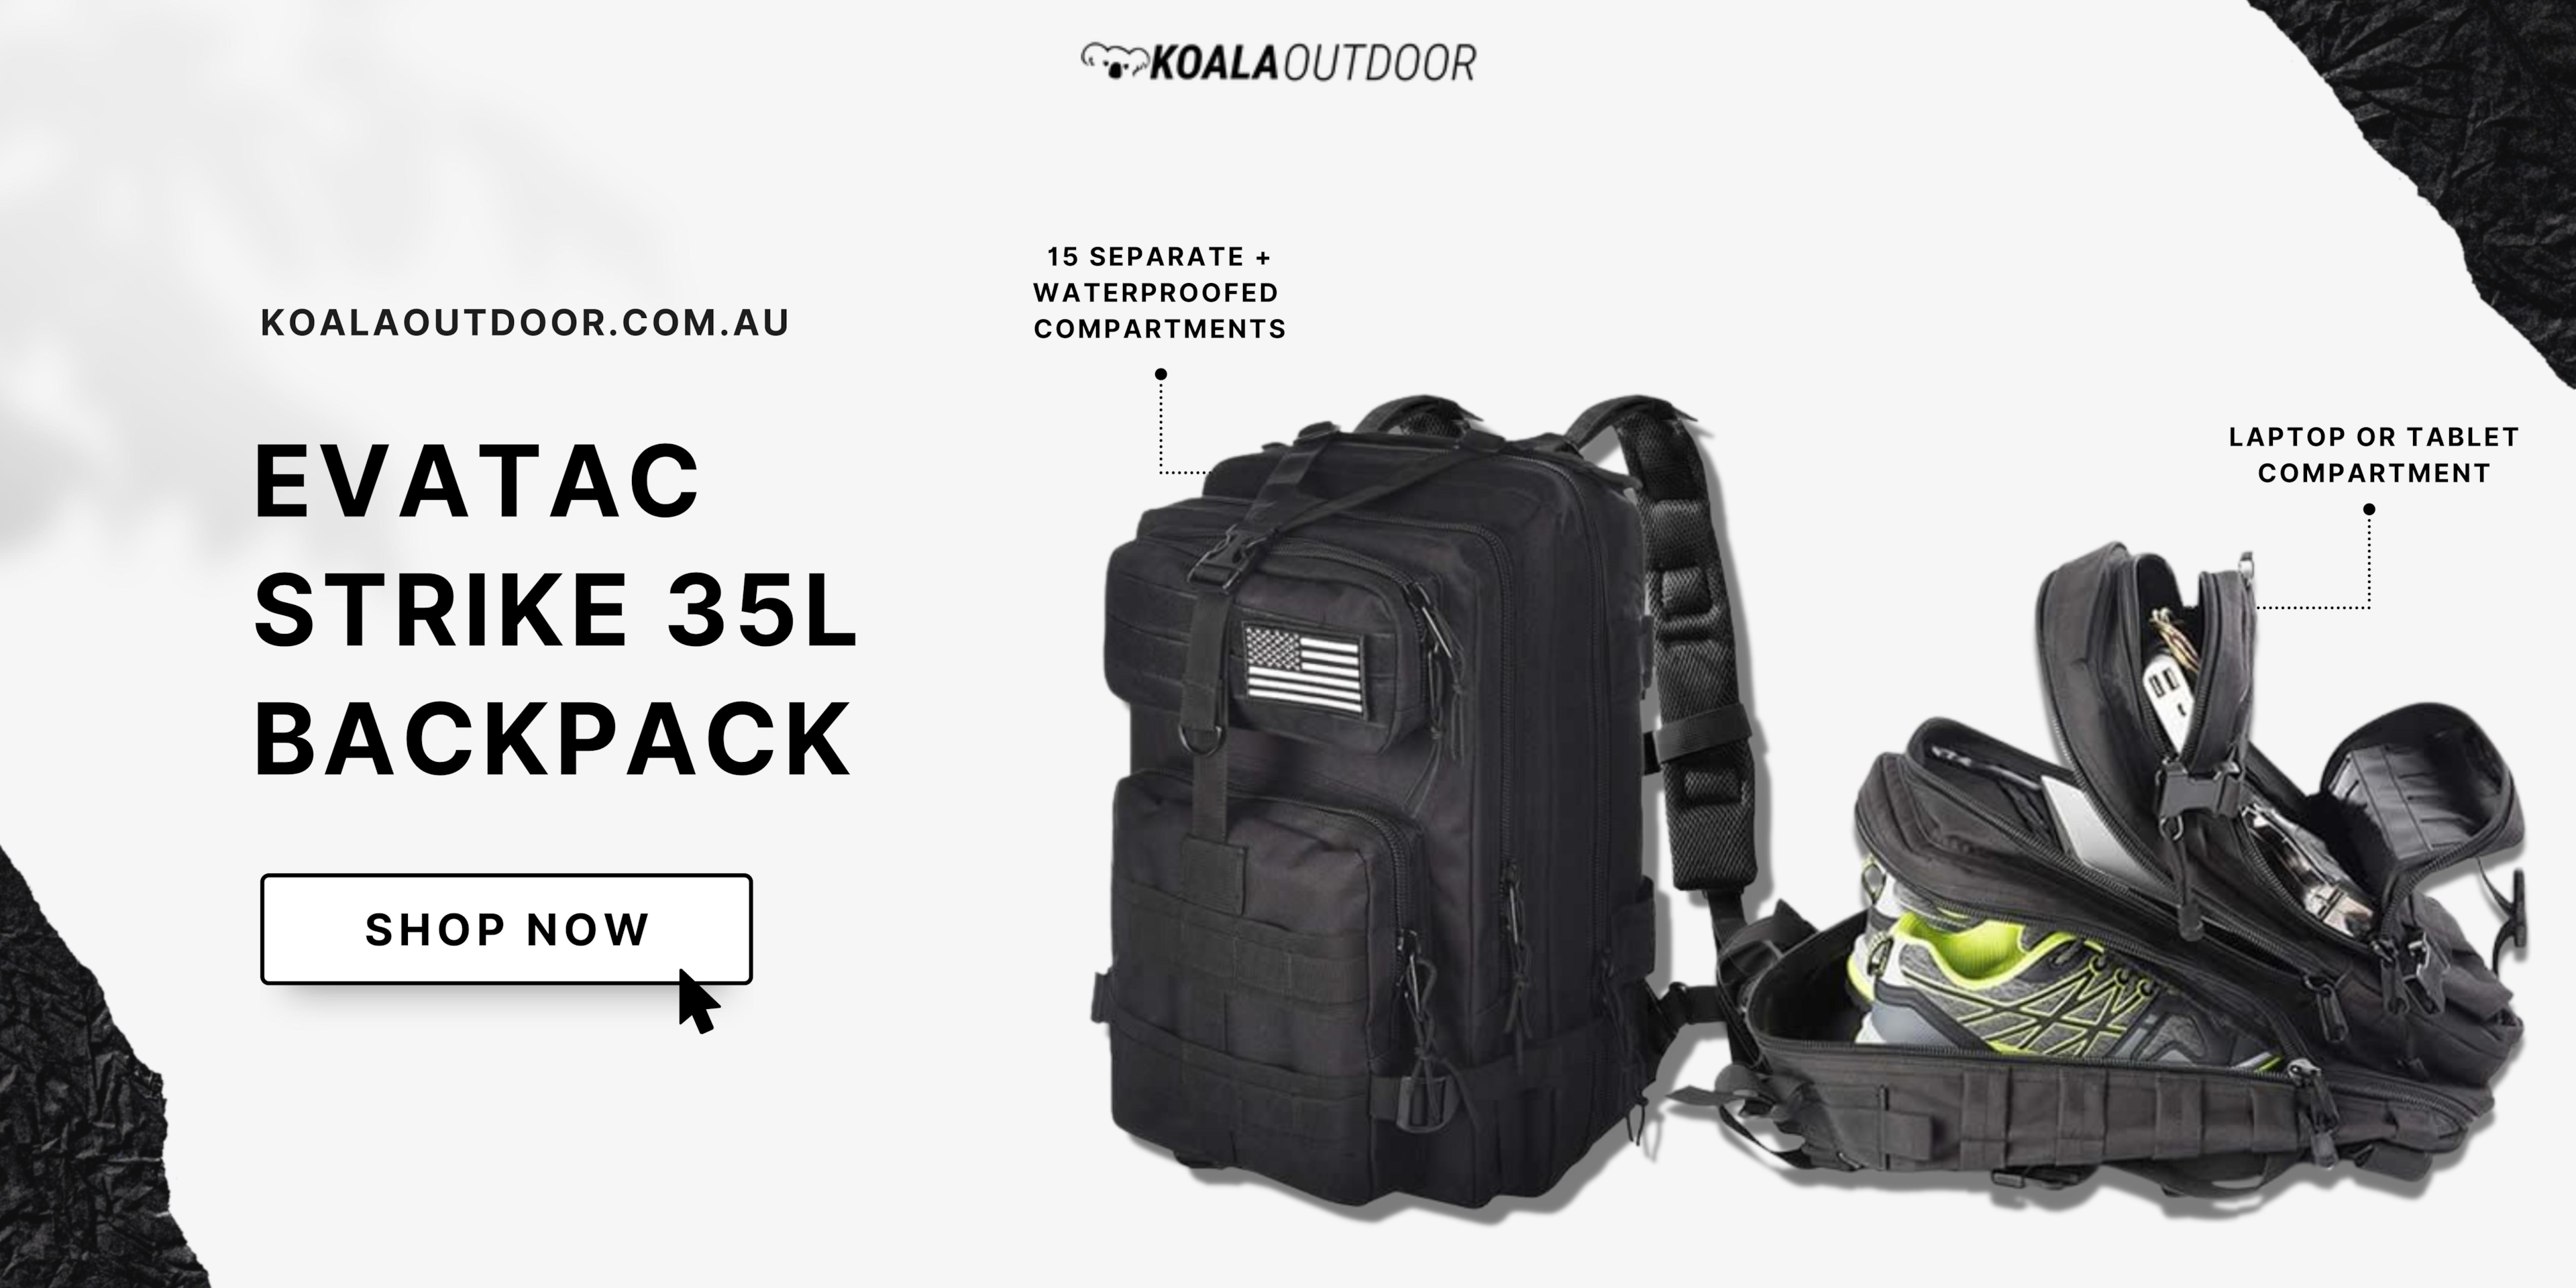 Evatac 35L Backpack with padded shoulder strap and main compartment